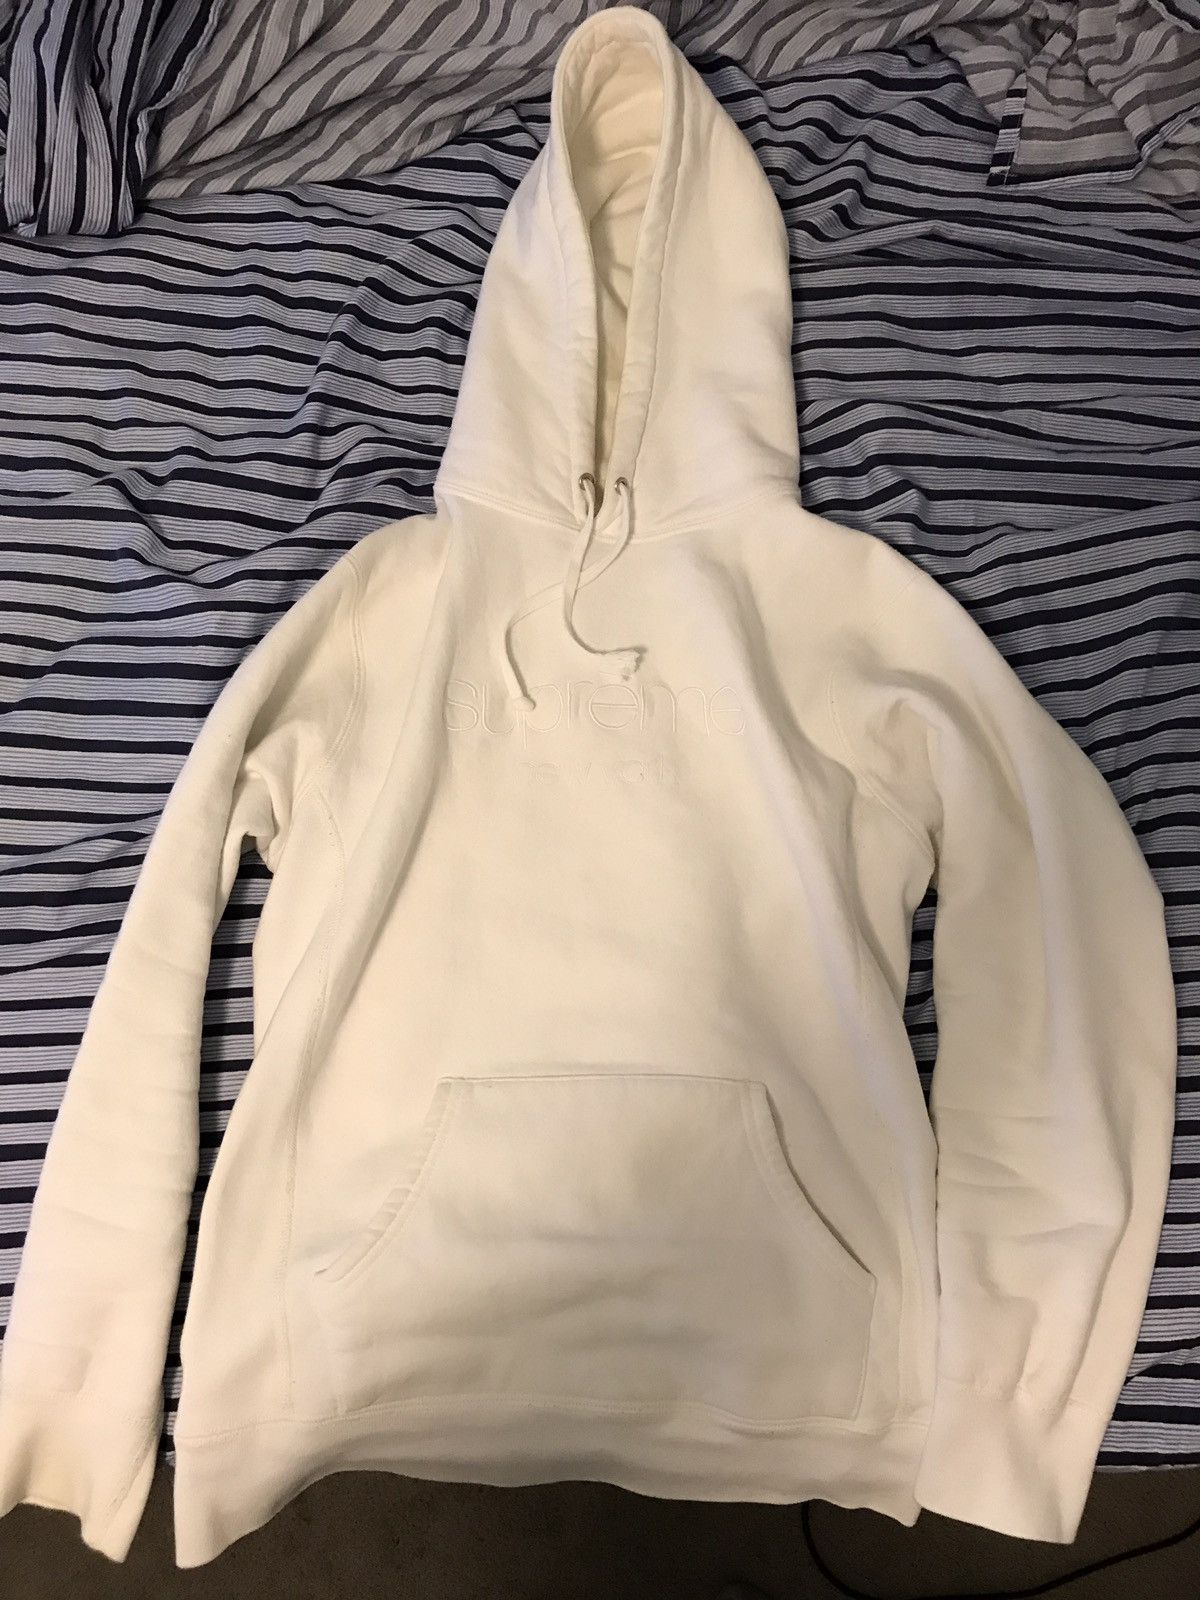 Supreme White Supreme Hoodie With Old Logo Size US M / EU 48-50 / 2 - 1 Preview